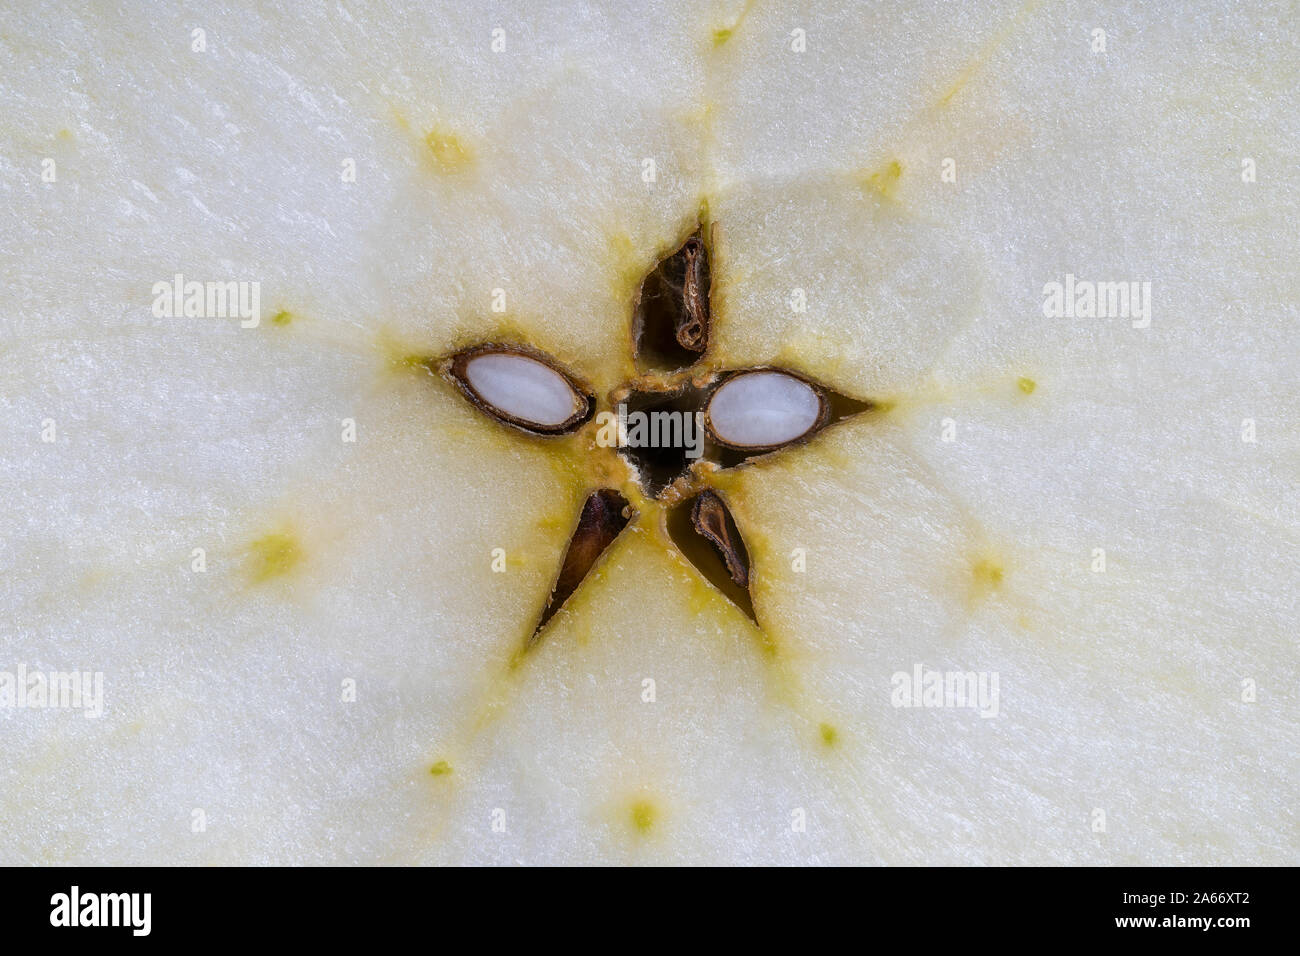 Cut fresh apple in half, slice. Apple center core and seed on background, close up, top view. Concept of healthy eating Stock Photo